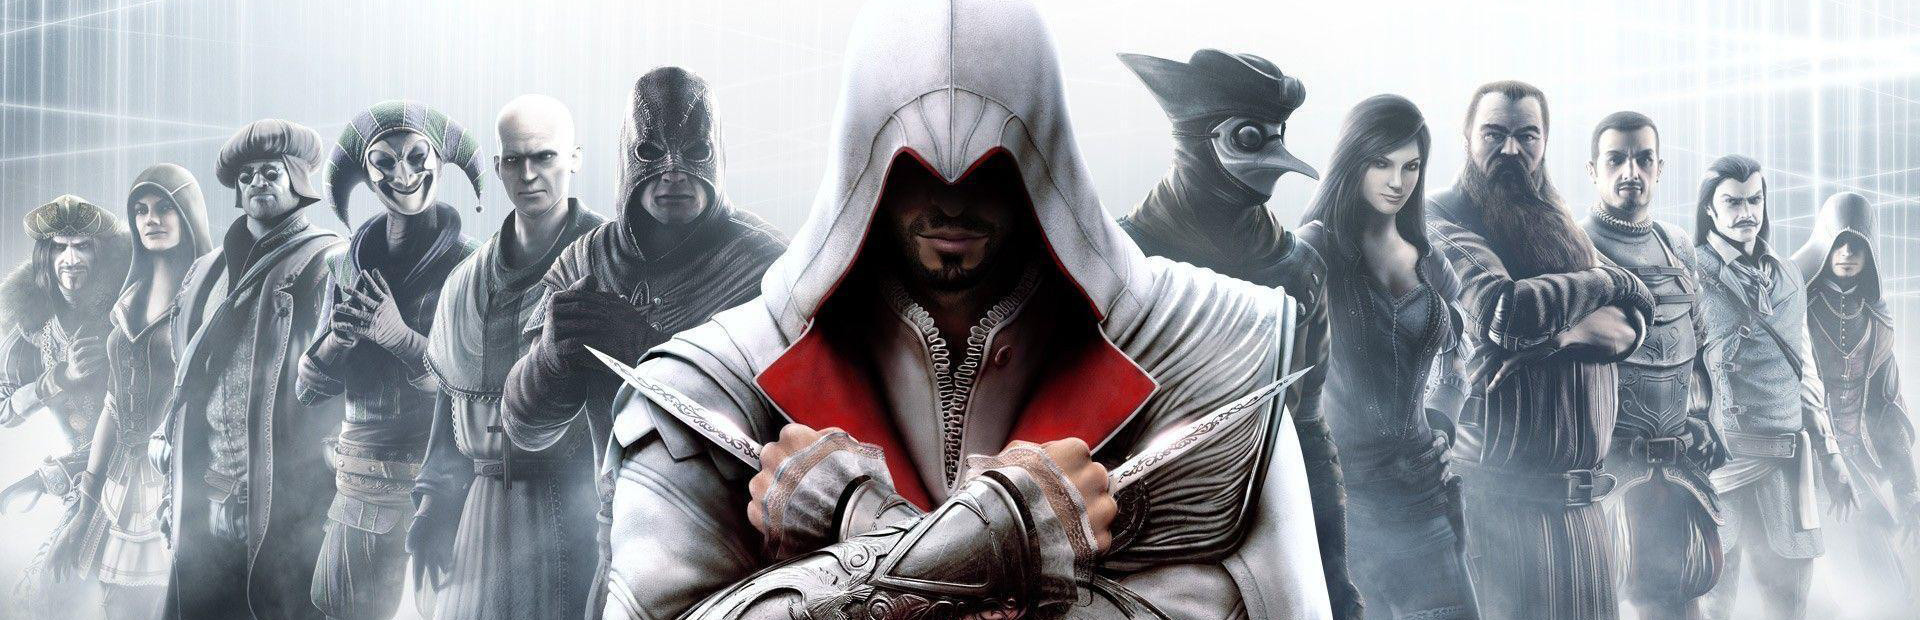 Assassin’s Creed® Brotherhood cover image